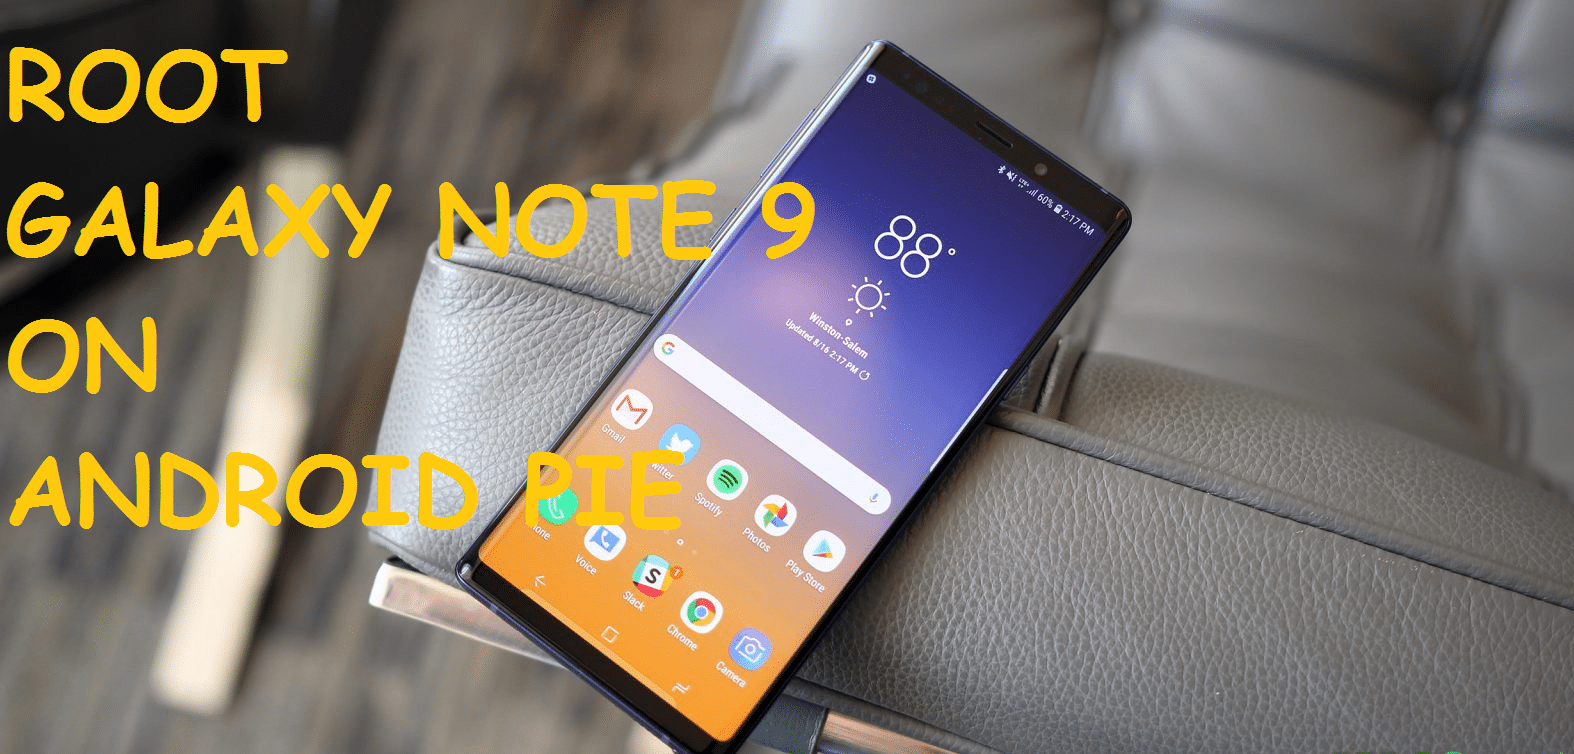 Root Galaxy Note 9 On Android Pie 9.0 Firmware